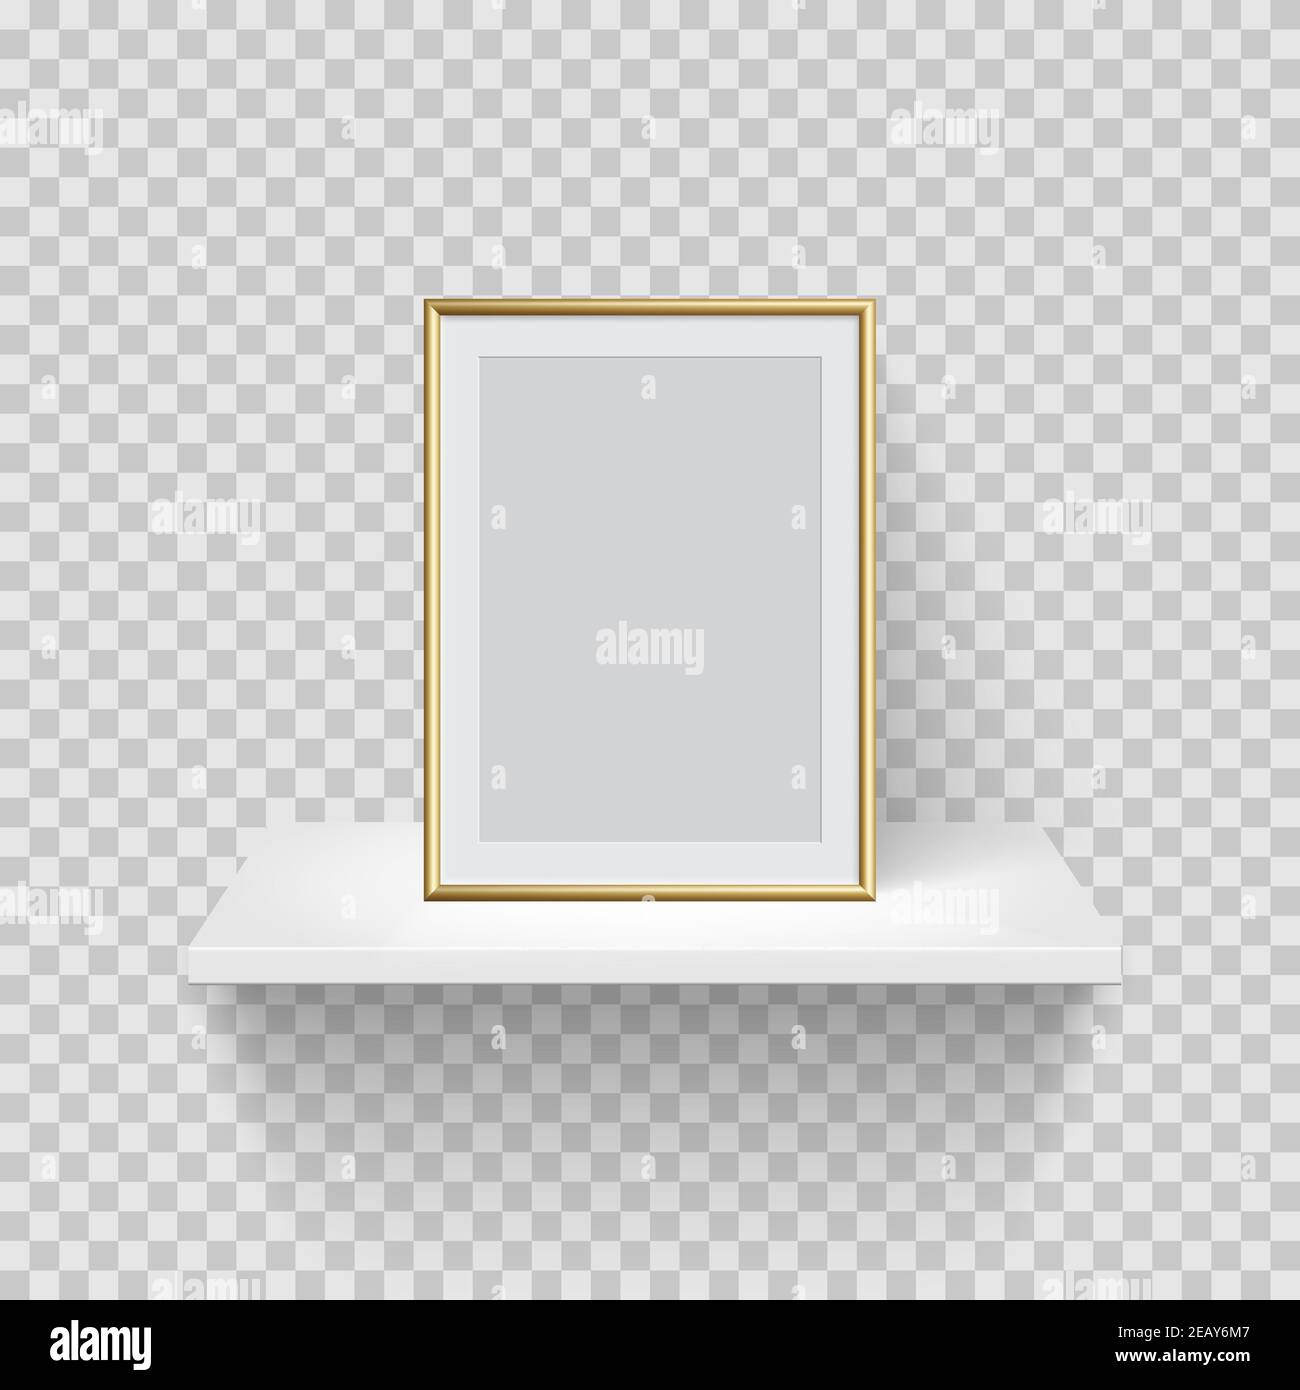 https://c8.alamy.com/comp/2EAY6M7/gold-vertical-frame-for-picture-on-white-shelf-blank-space-for-picture-painting-card-or-photo-3d-realistic-modern-template-vector-illustration-si-2EAY6M7.jpg